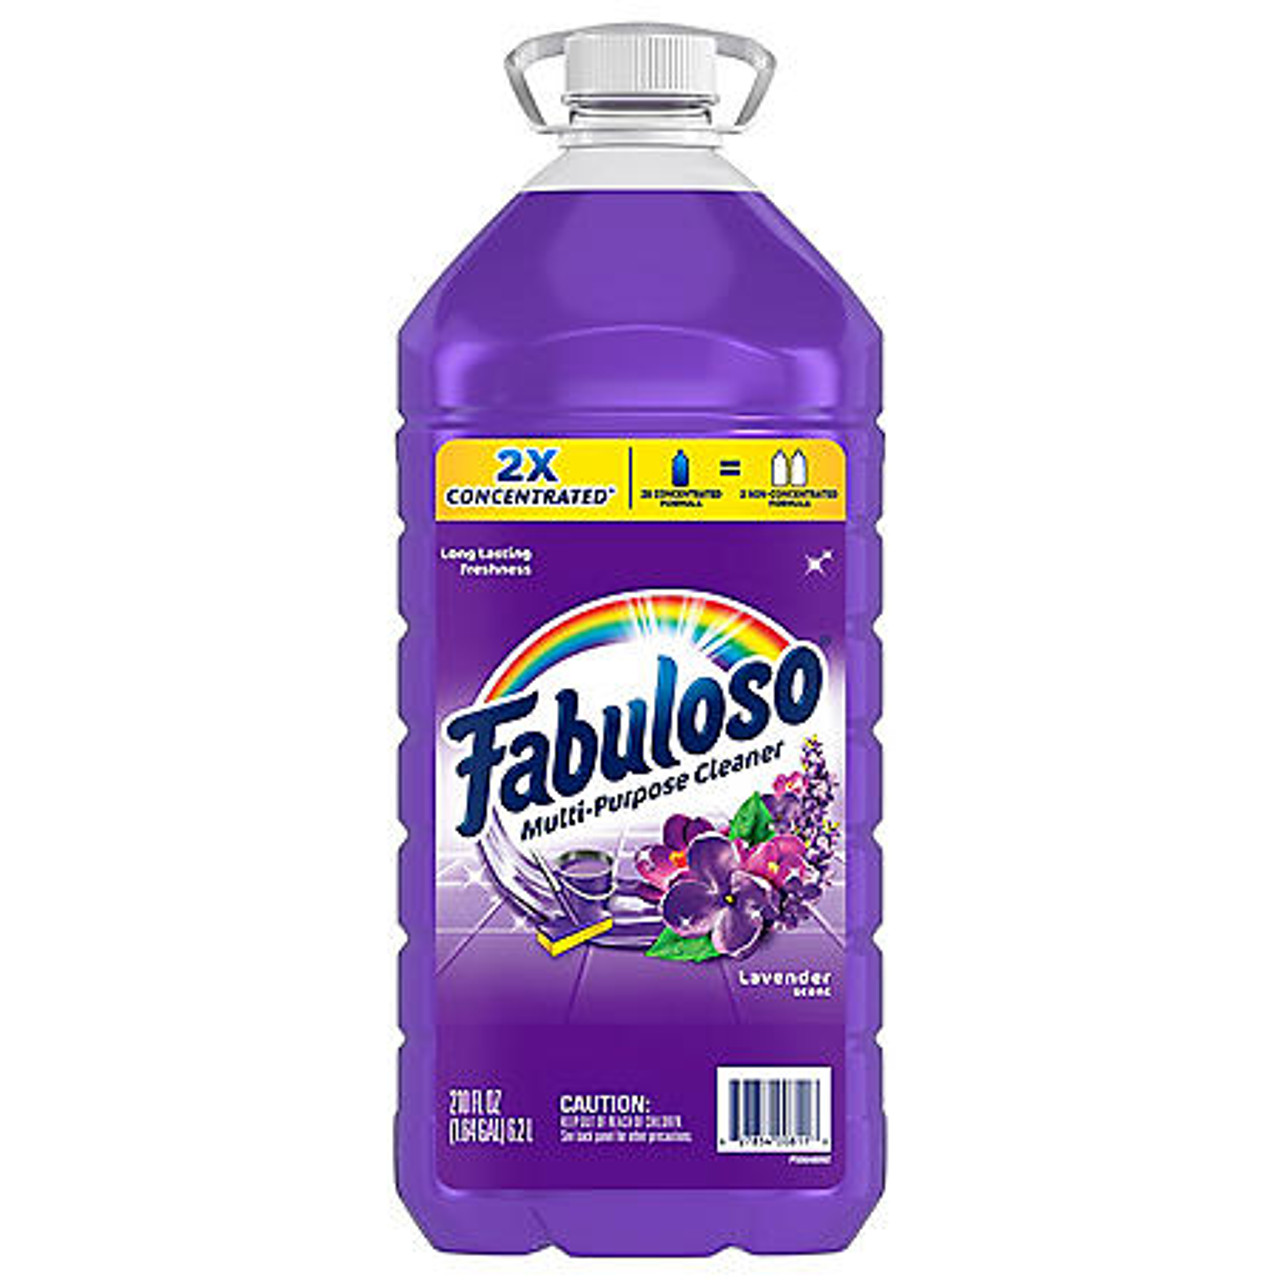 Fabuloso 2X Concentrated Multi-Purpose Cleaner, Lavender (210 fl. oz.) - [From 45.00 - Choose pk Qty ] - *Ships from Miami